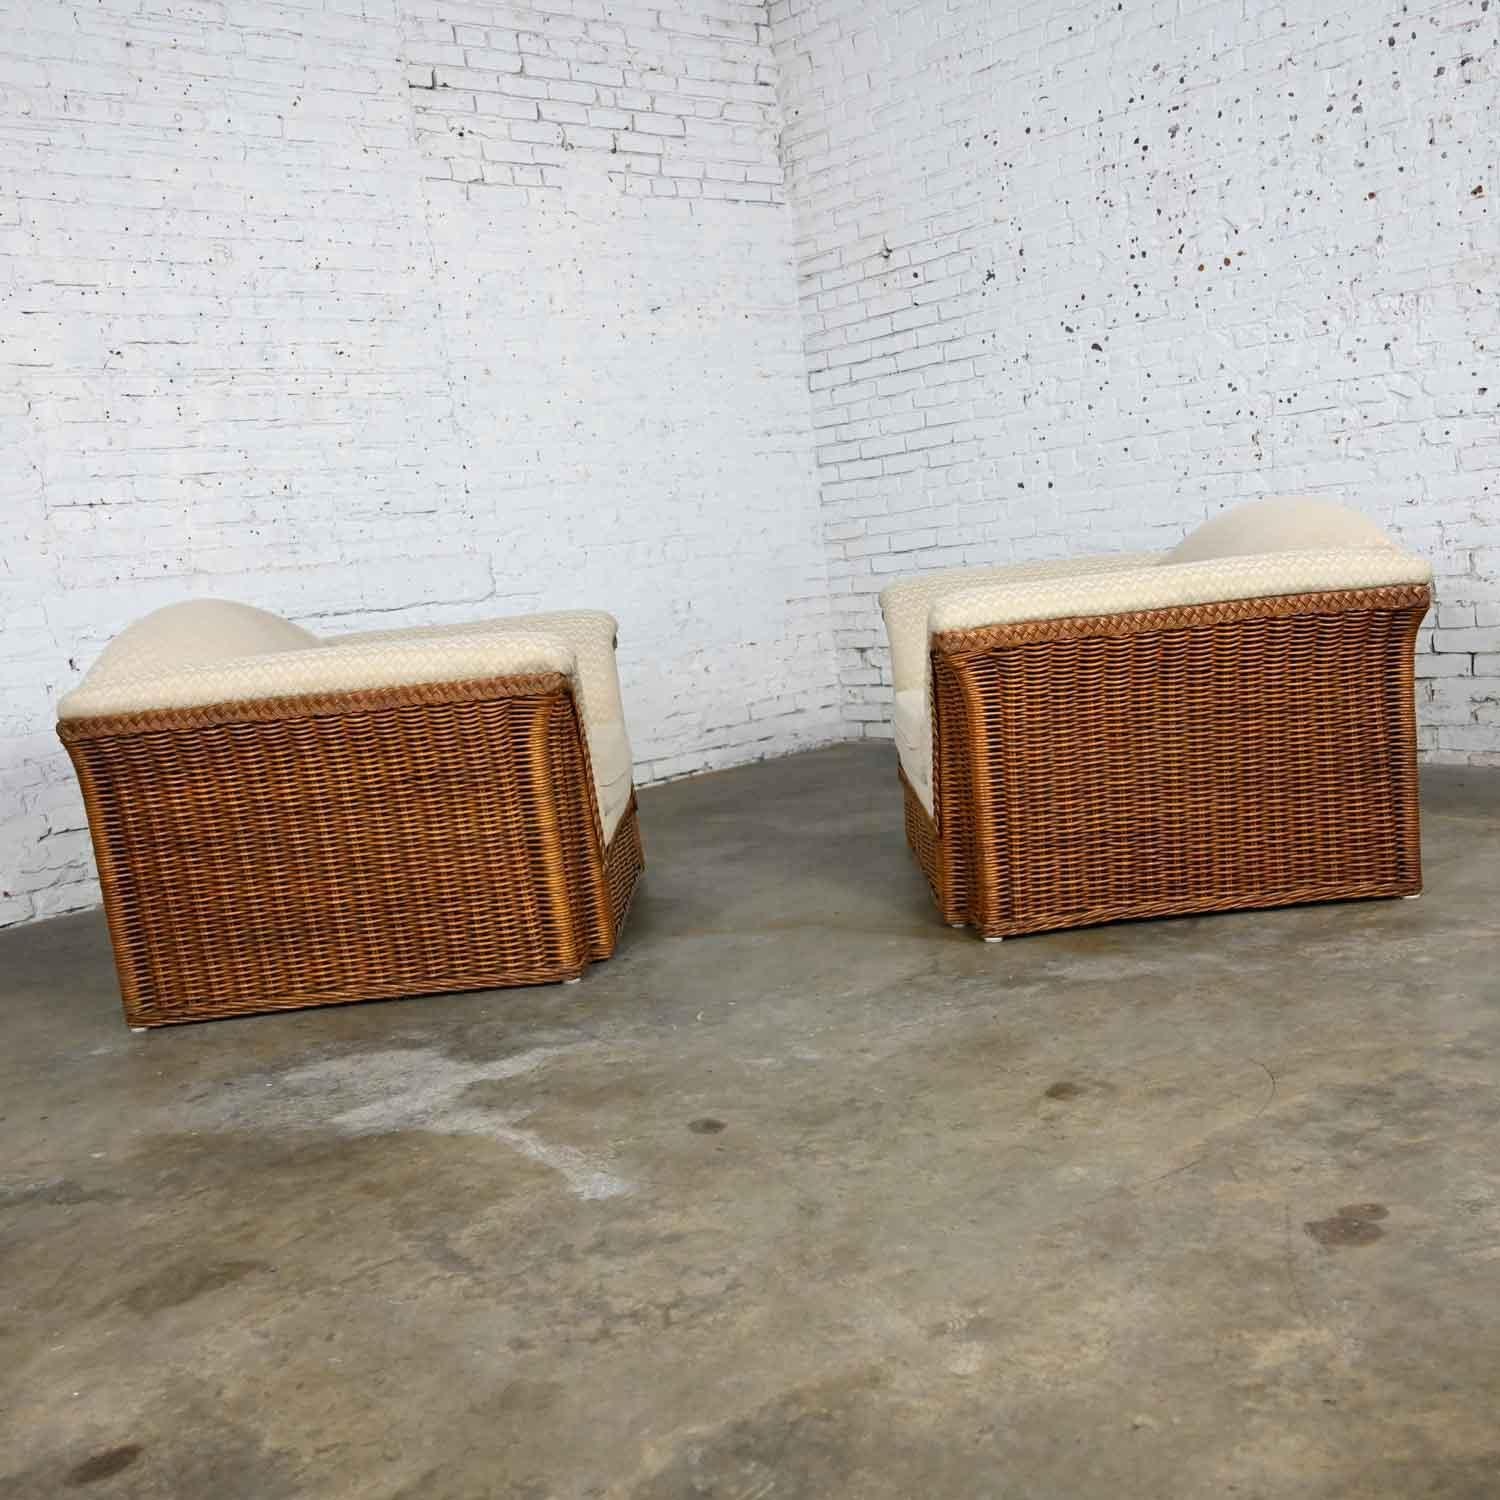 20th Century Rattan Wicker Pair of Oversized Lounge Chairs Manner of Michael Taylor For Sale